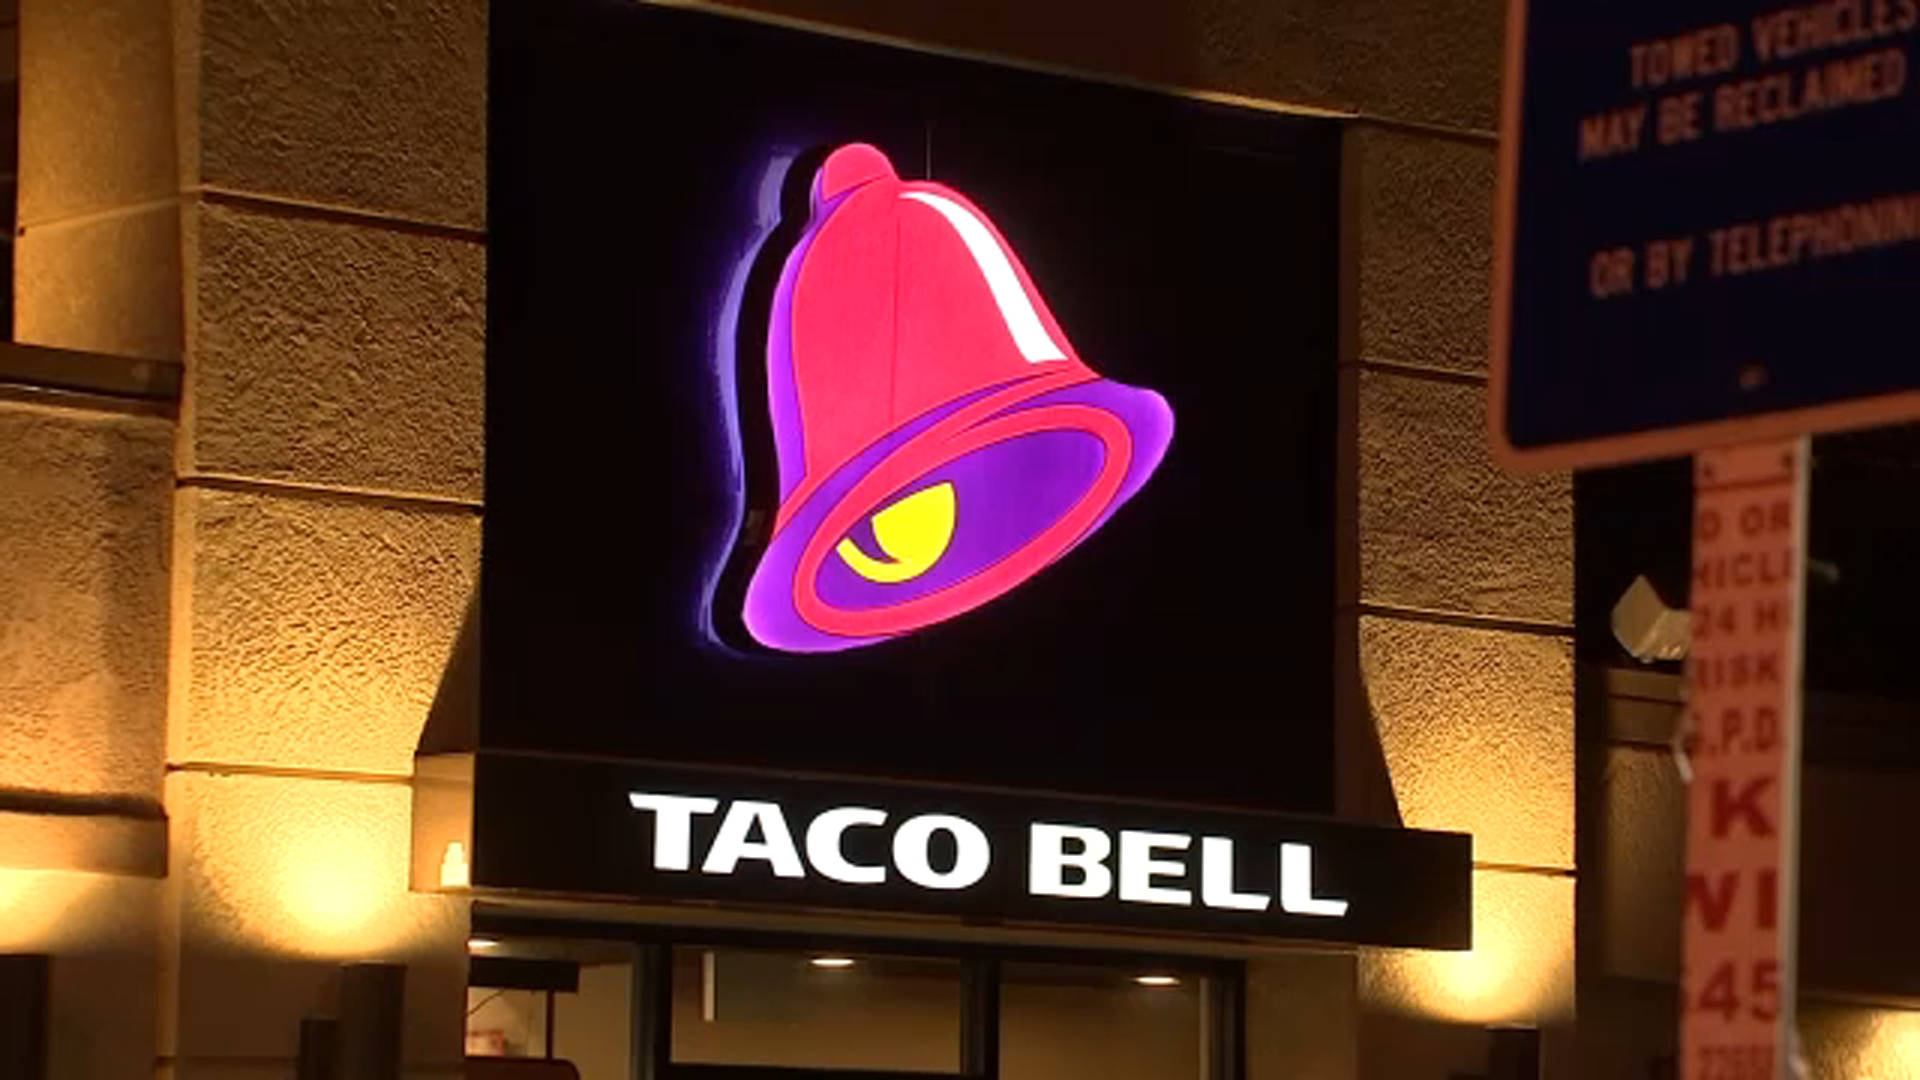 Taco Bell Glowing Signage Background